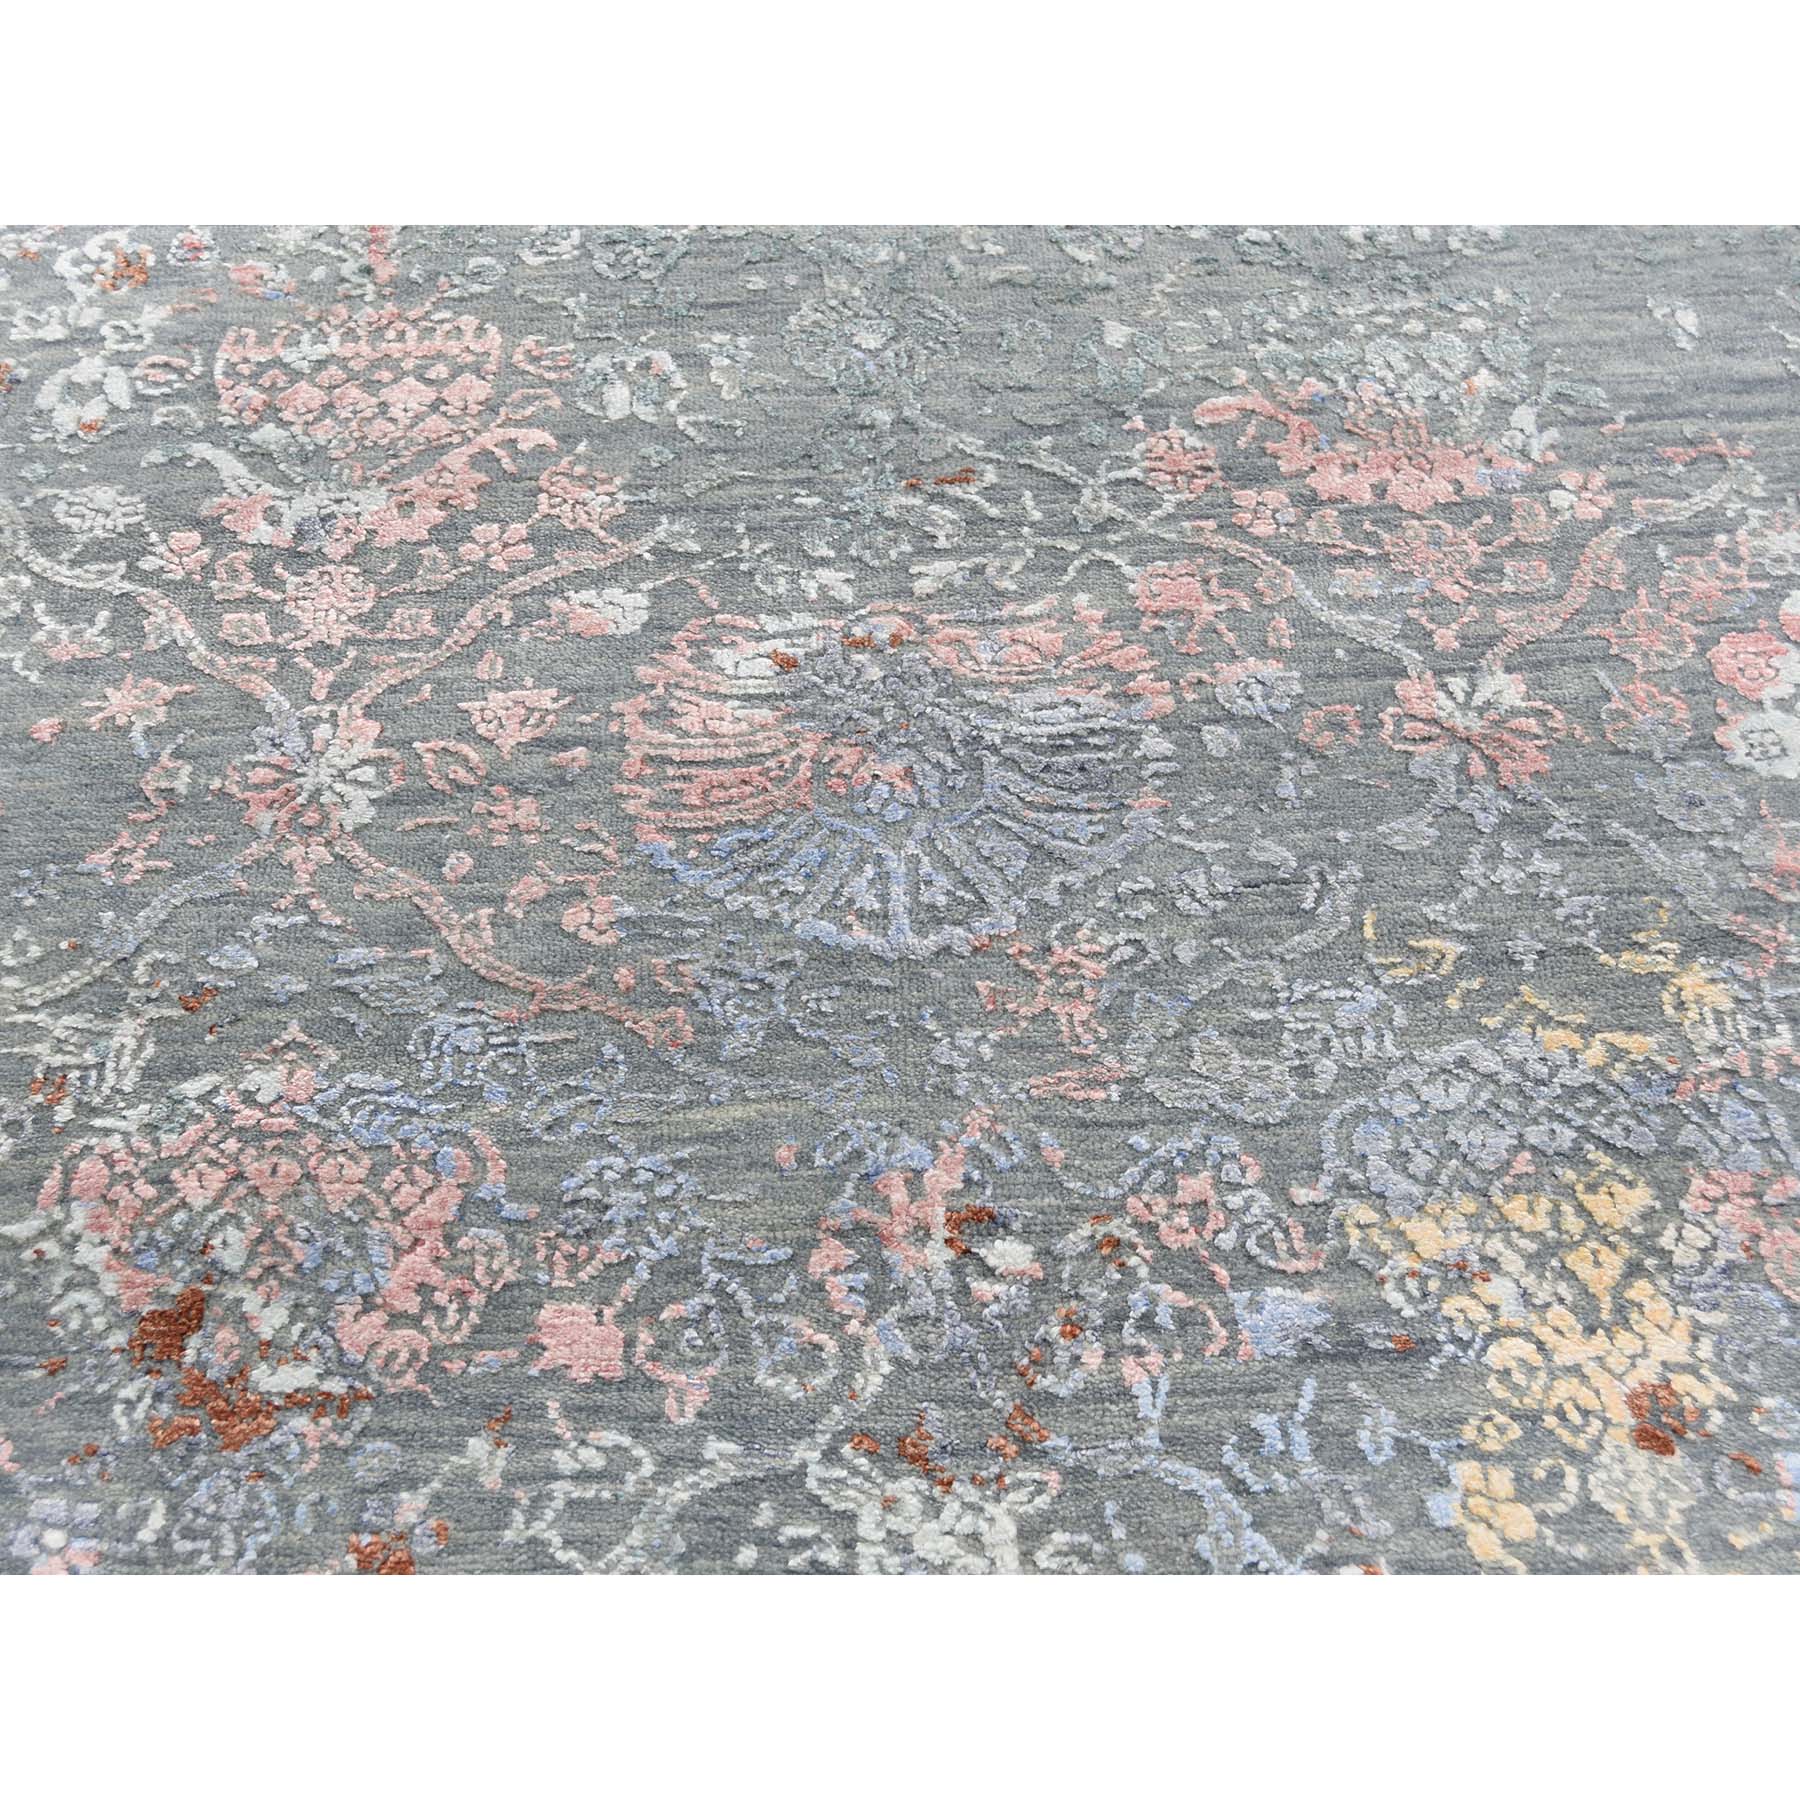 9-x12-1  Blue Flower Bouquet Design Wool And Silk Hand-Knotted Oriental Rug 